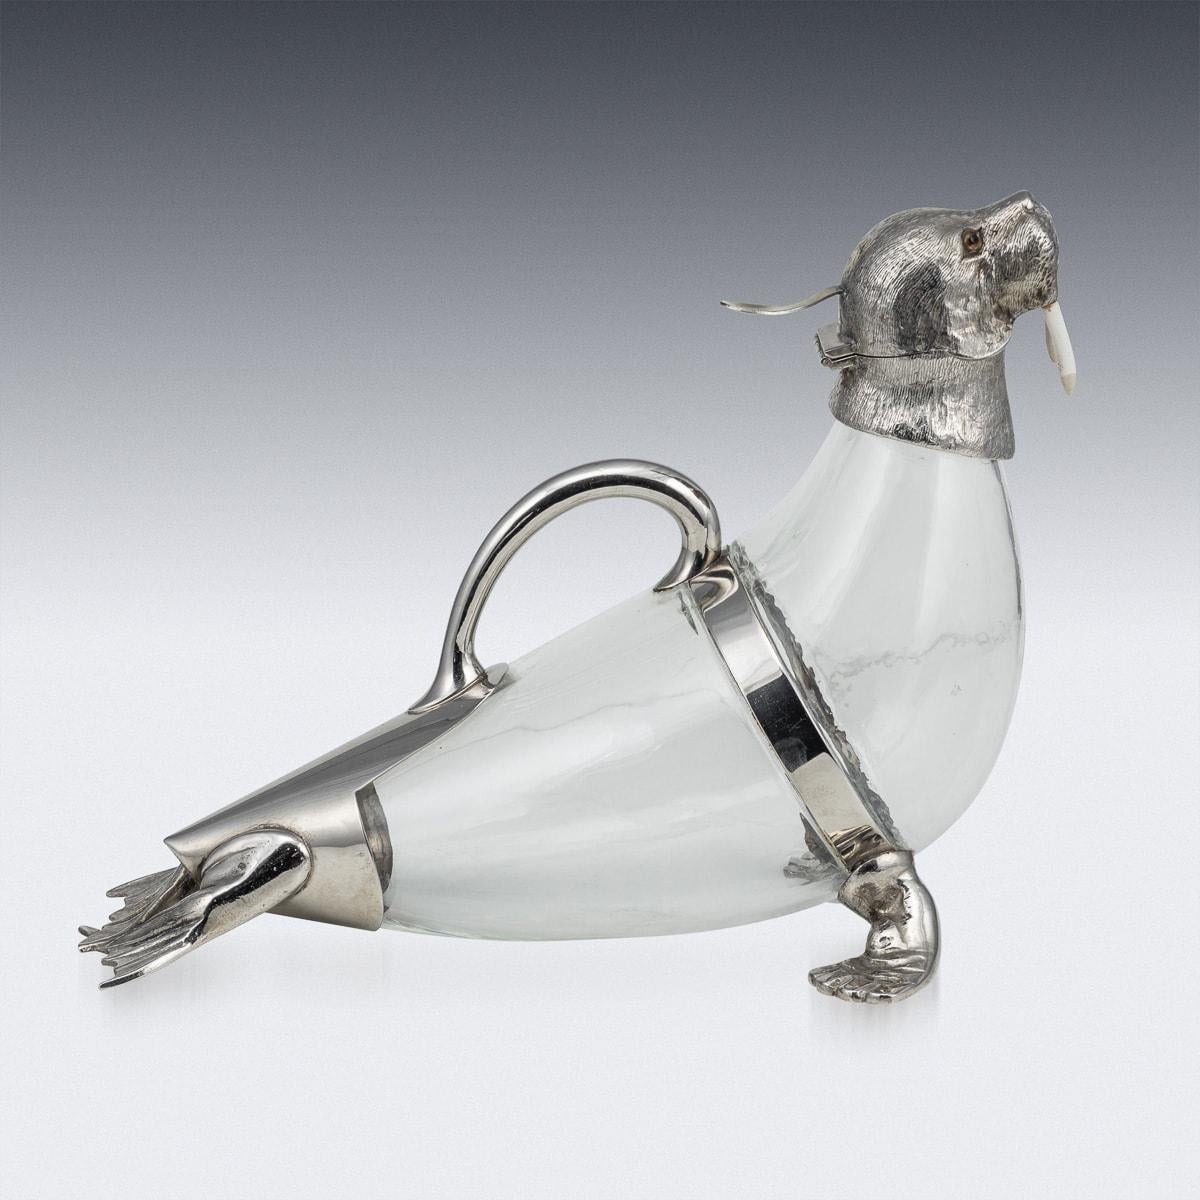 British 19th Century Victorian Silver Plate Mounted Novelty Walrus Claret Jug c.1880 For Sale